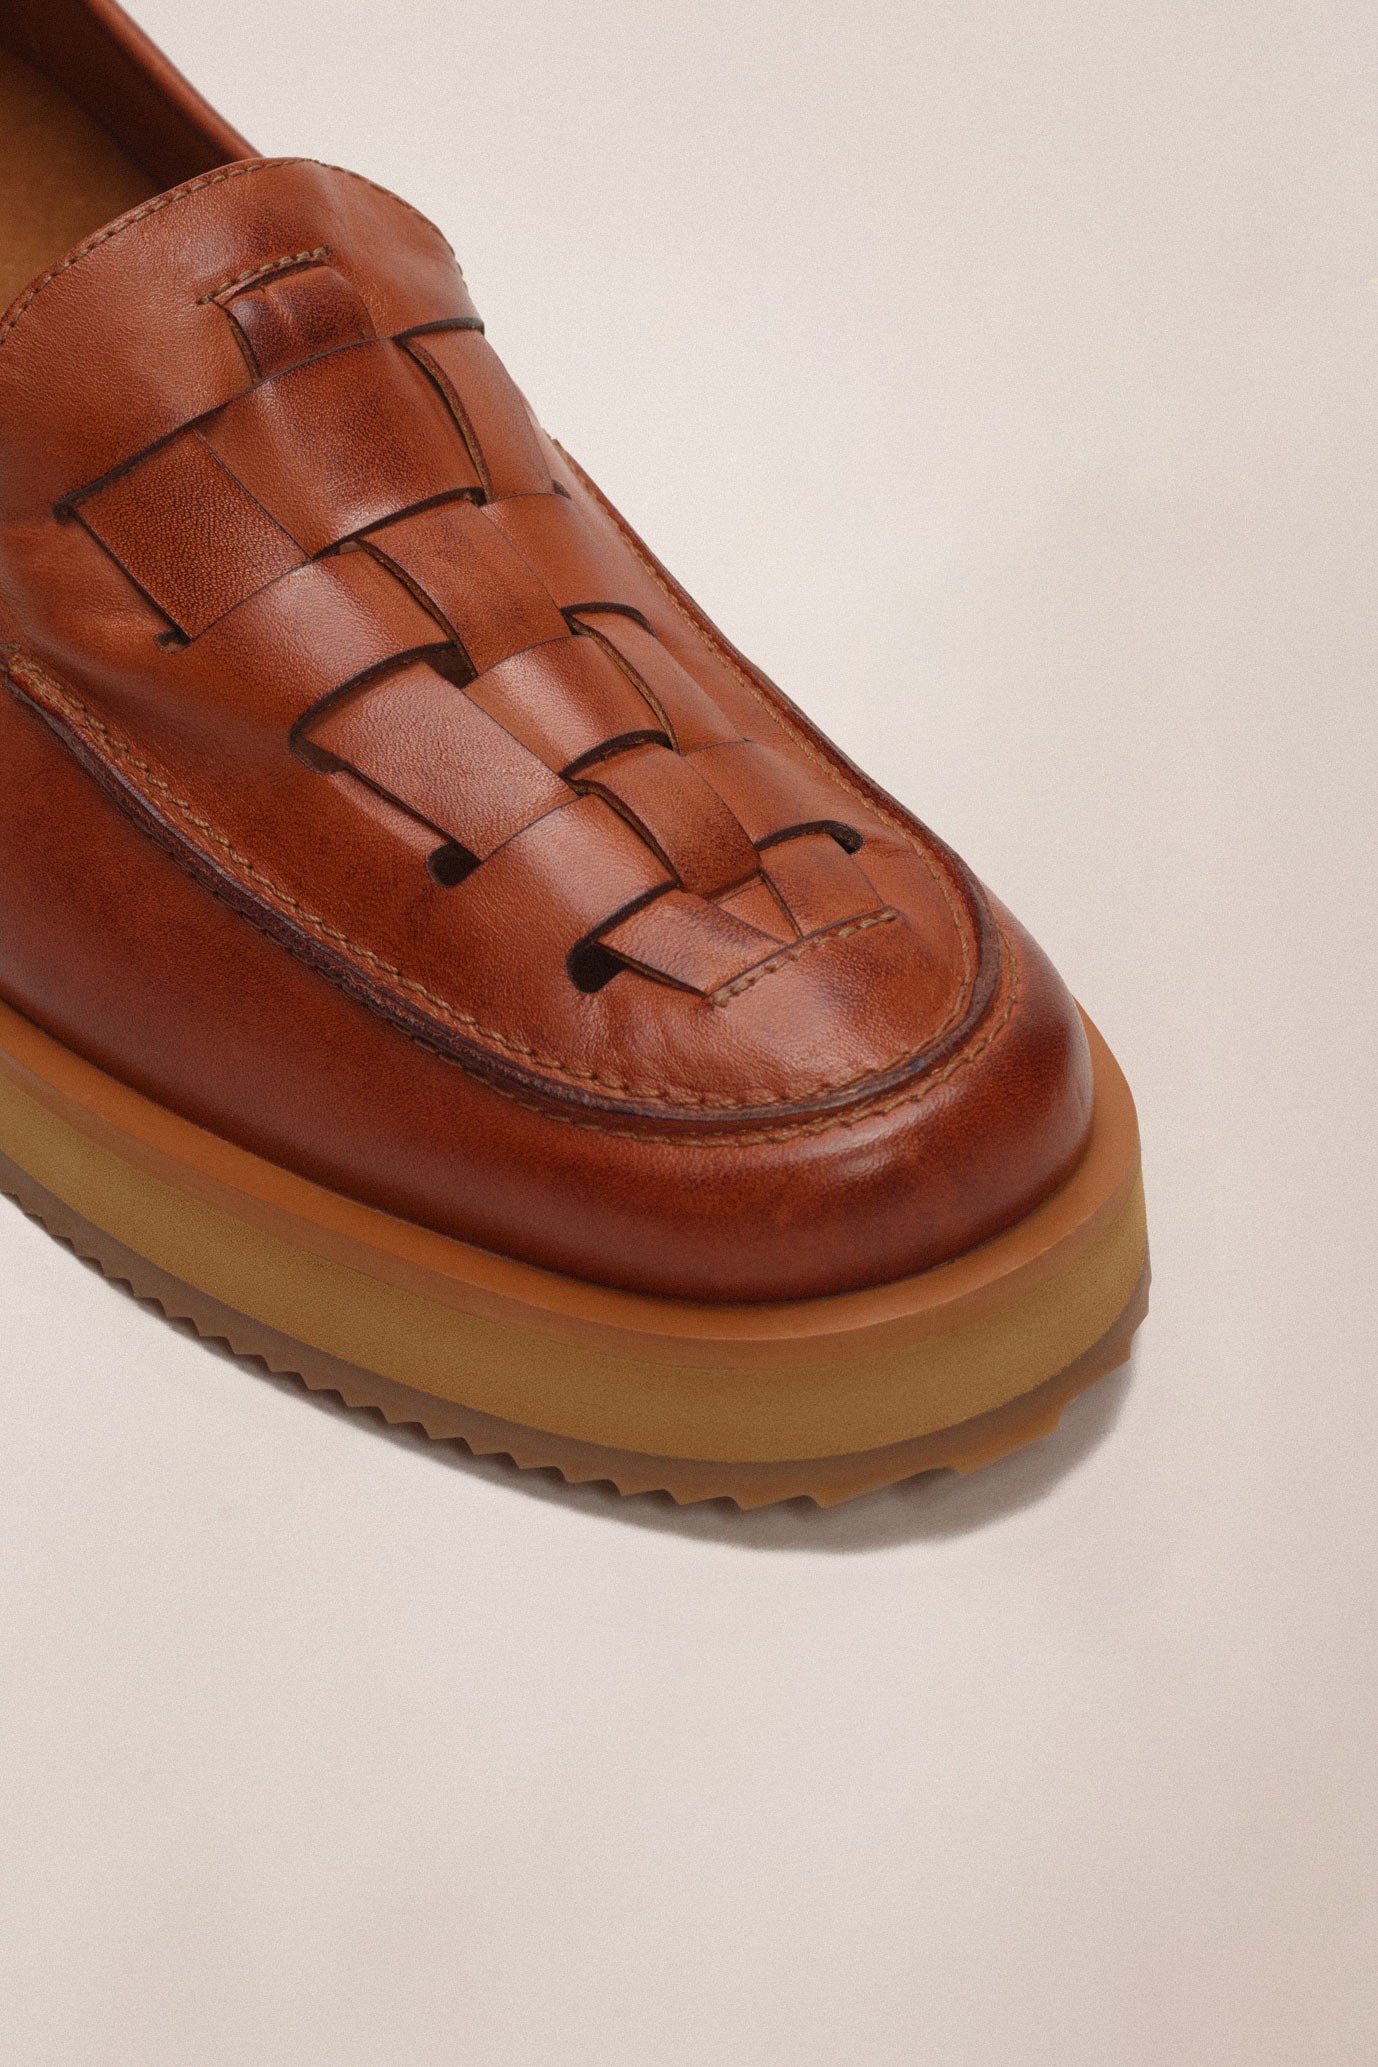 Loafer Tresse Couro